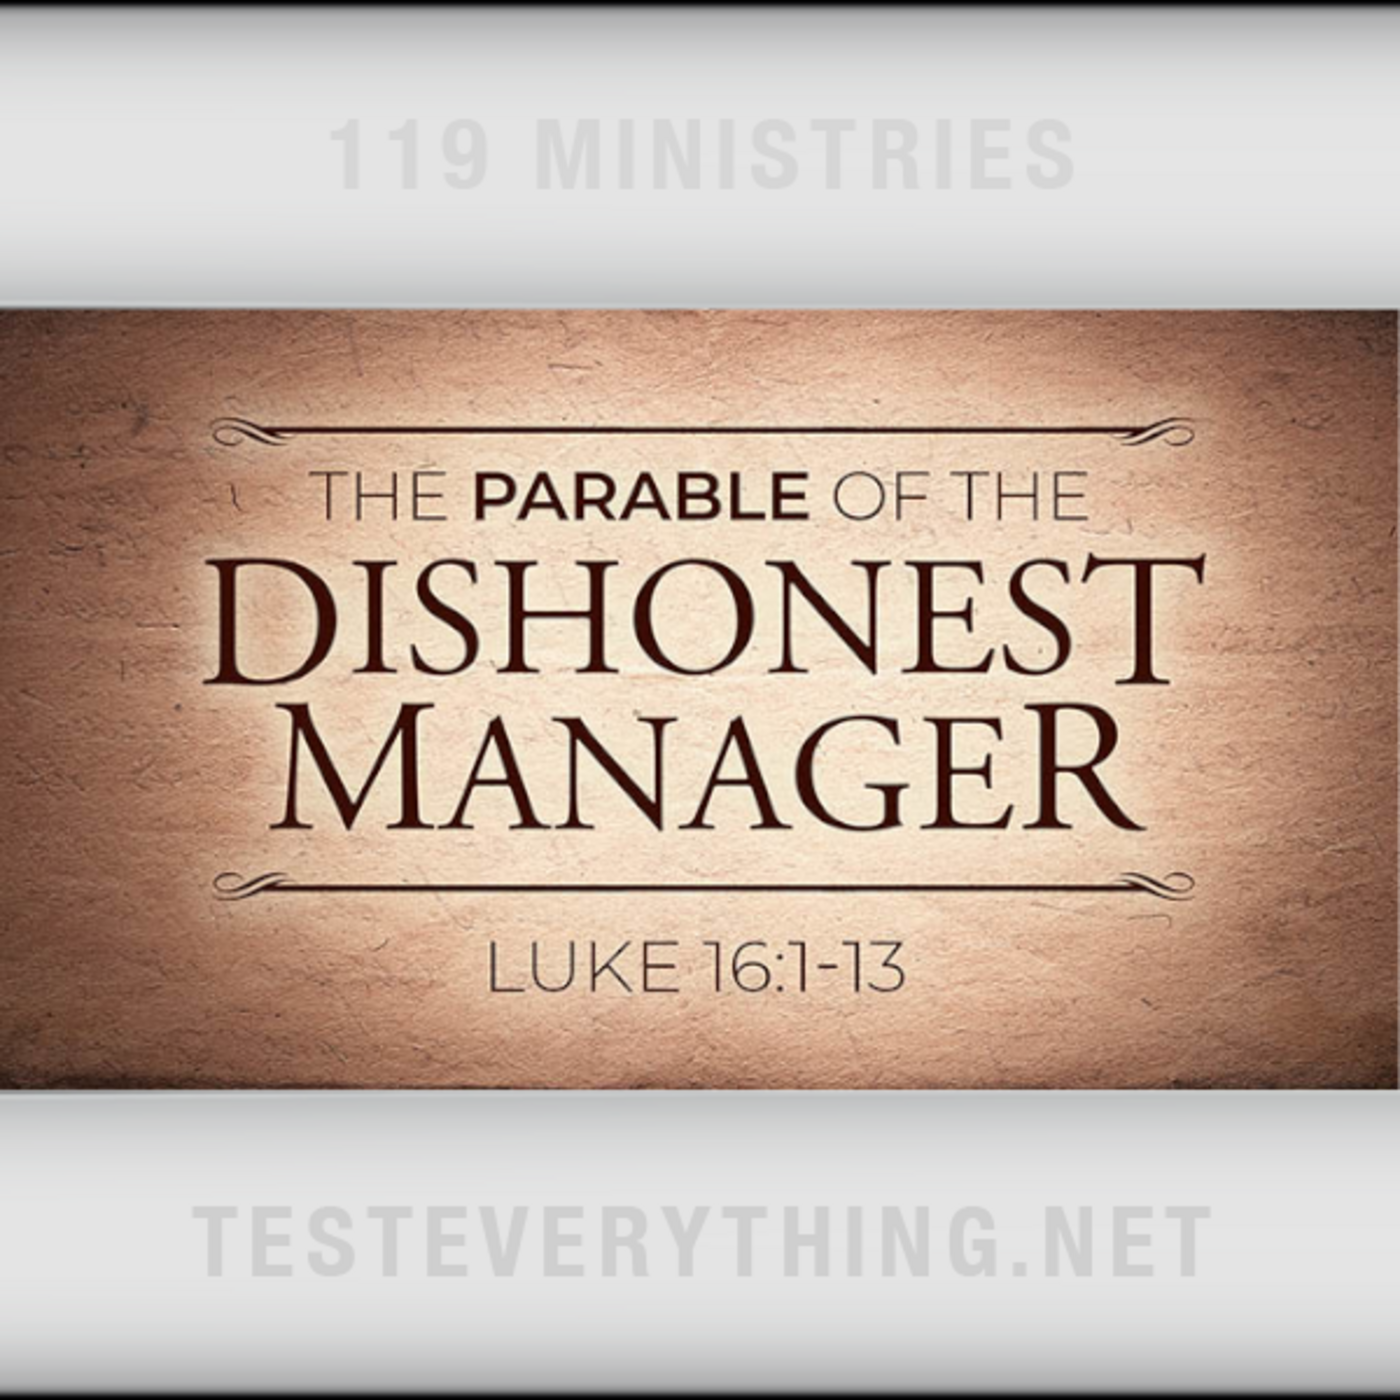 Episode 529: TE: The Parable of the Dishonest Manager